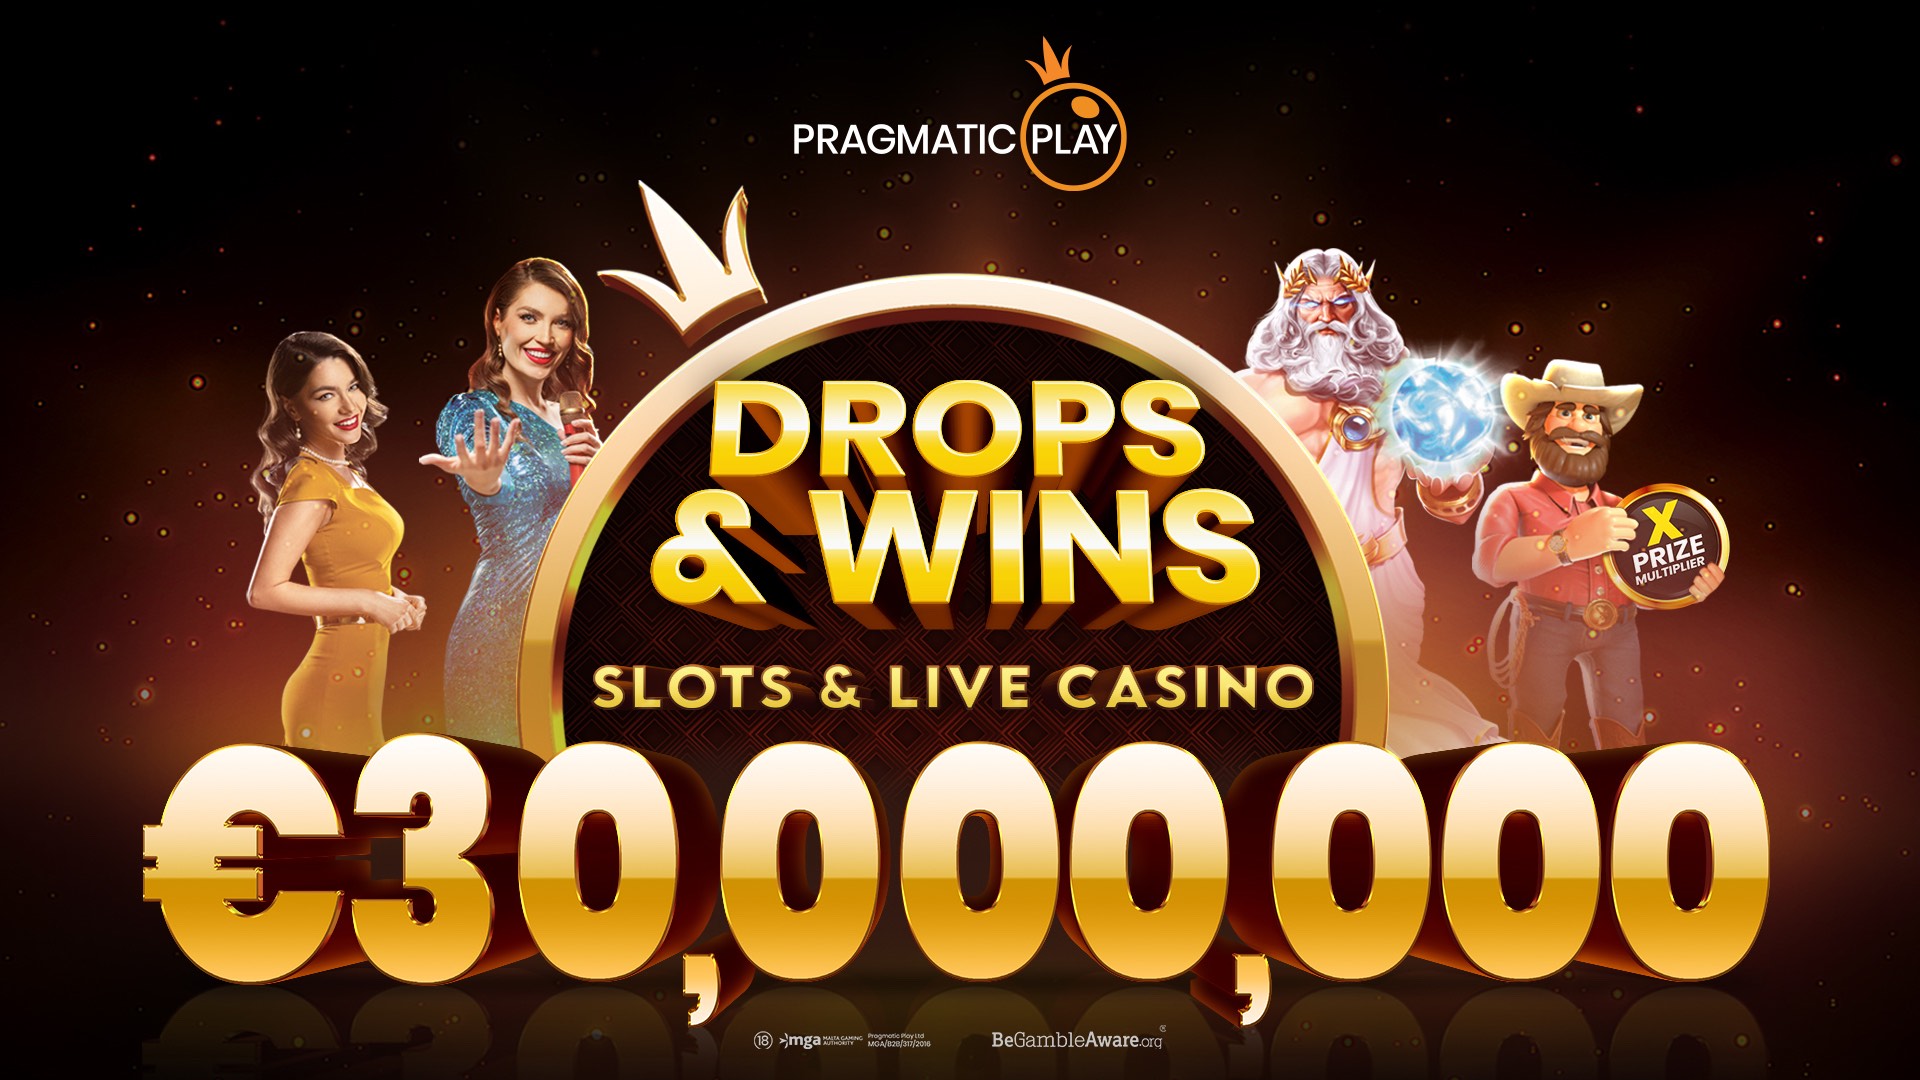 Pragmatic Play increases Drops & Wins prize pool to €30,000,000